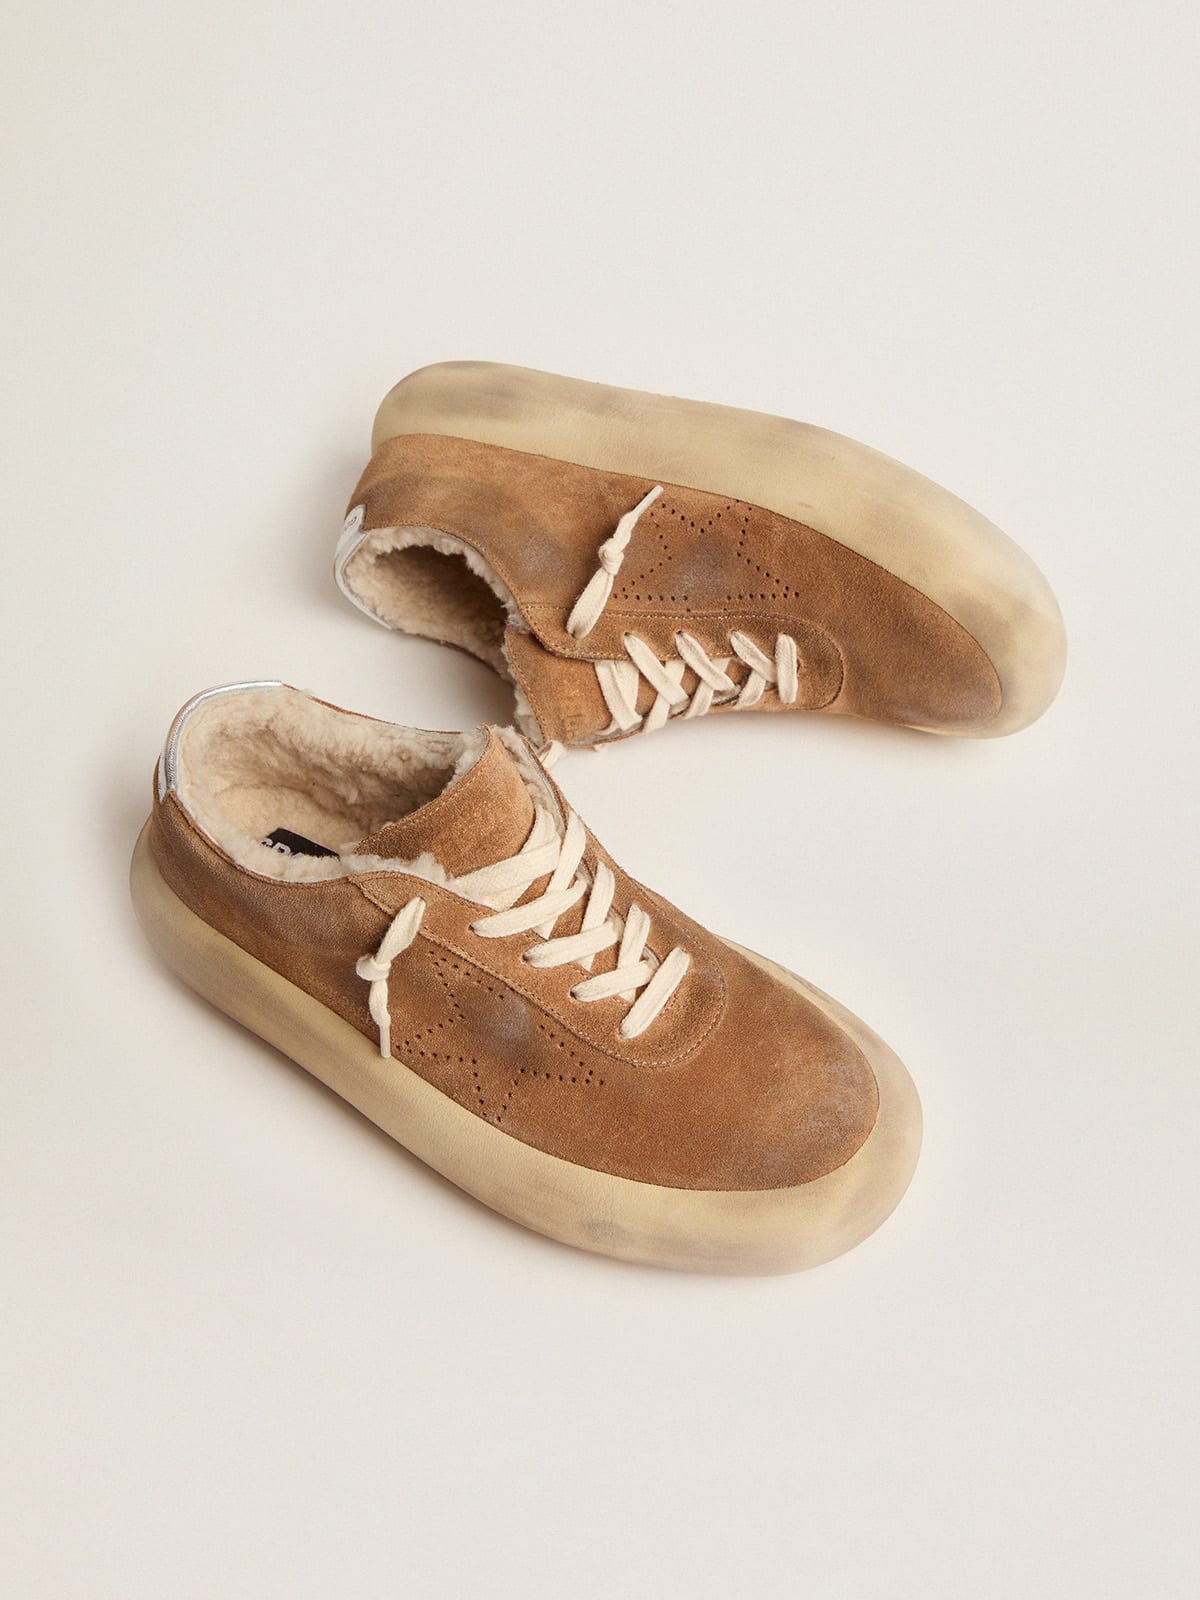 Golden Goose - Men's Space-Star shoes in tobacco-colored suede with shearling lining in 